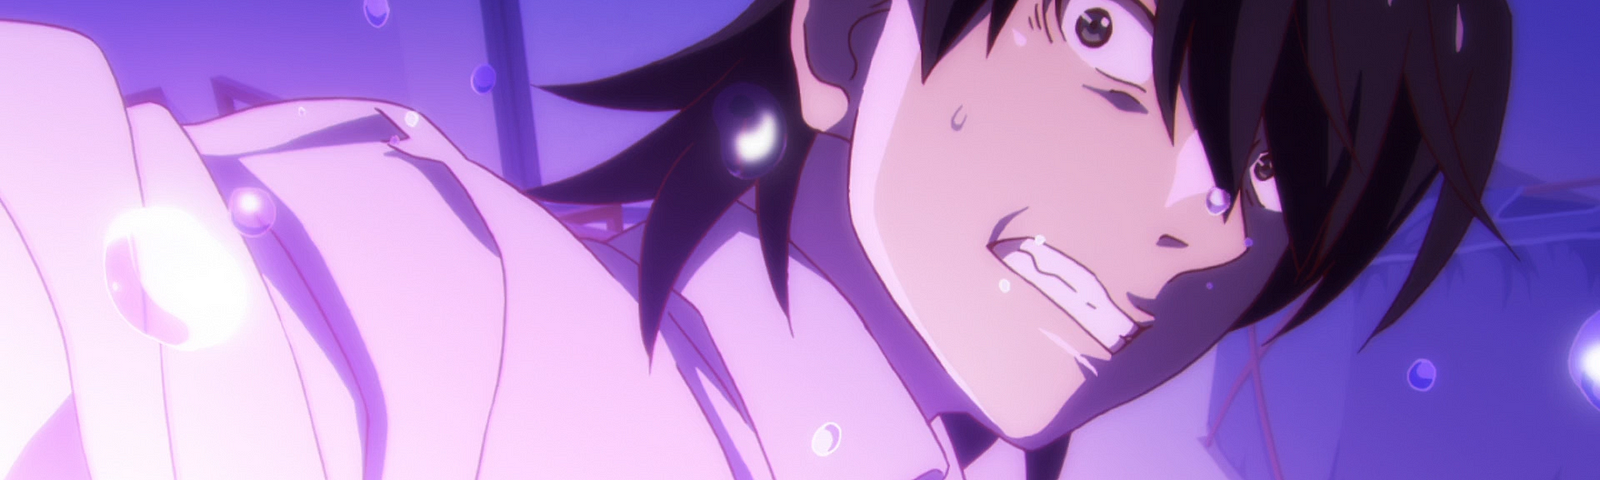 Monogatari Final Season: Owarimonogatari Part 3 Review: In Which Doctorkev  Embraces His Havoc-inciting Alter-ego, by DoctorKev, AniTAY-Official